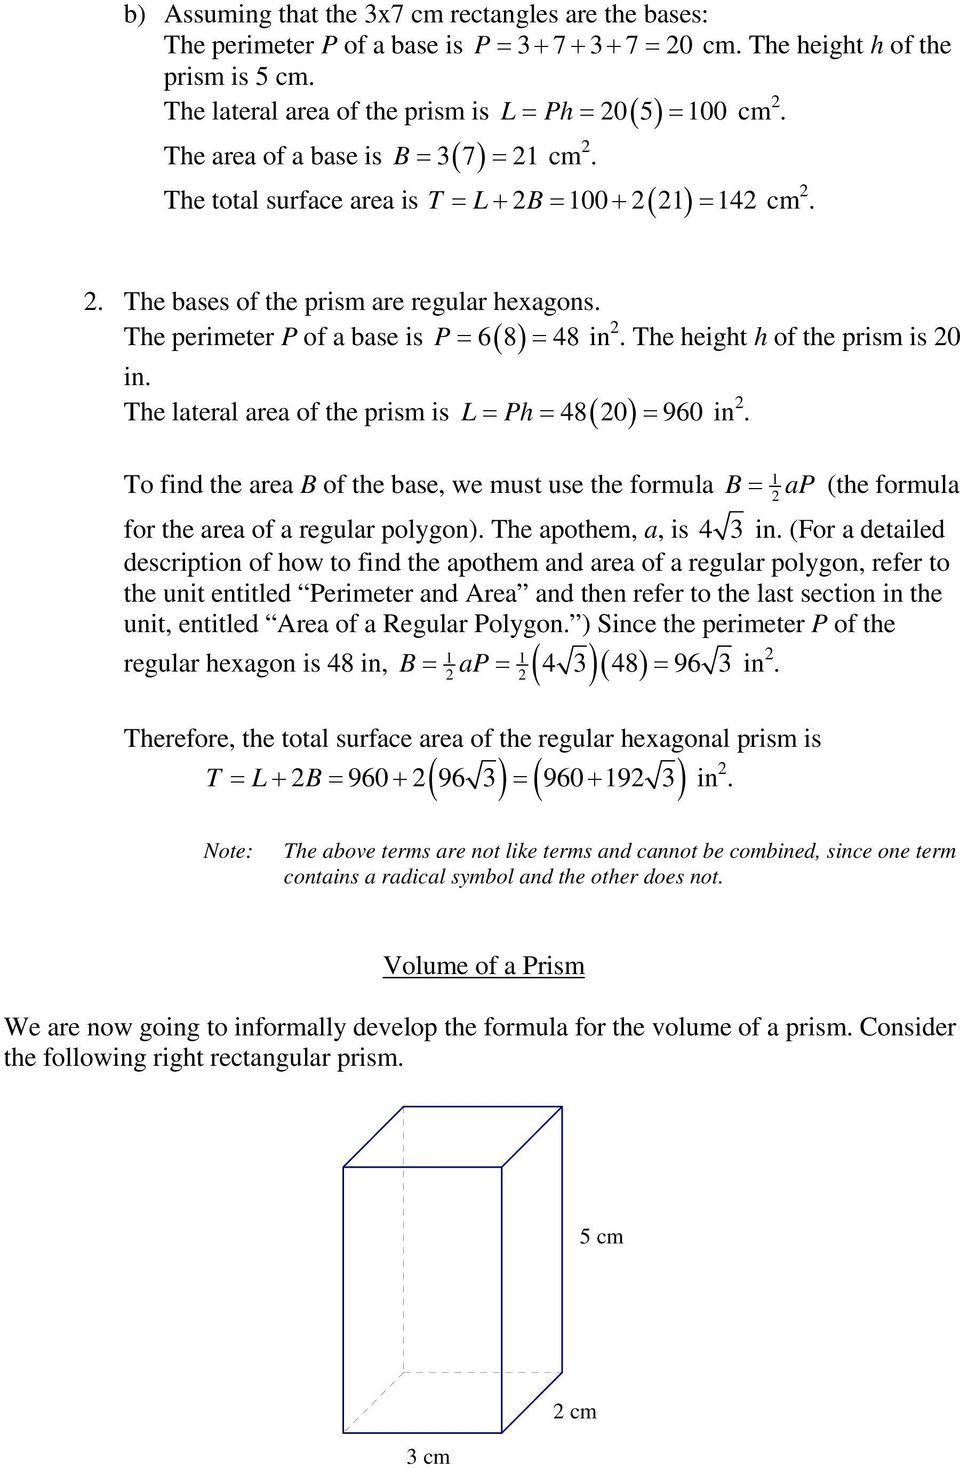 The perimeter P of a base is P = 68 ( ) = 48in. The height h of the prism is 0 in. L= Ph= 48 0 = 960 in.